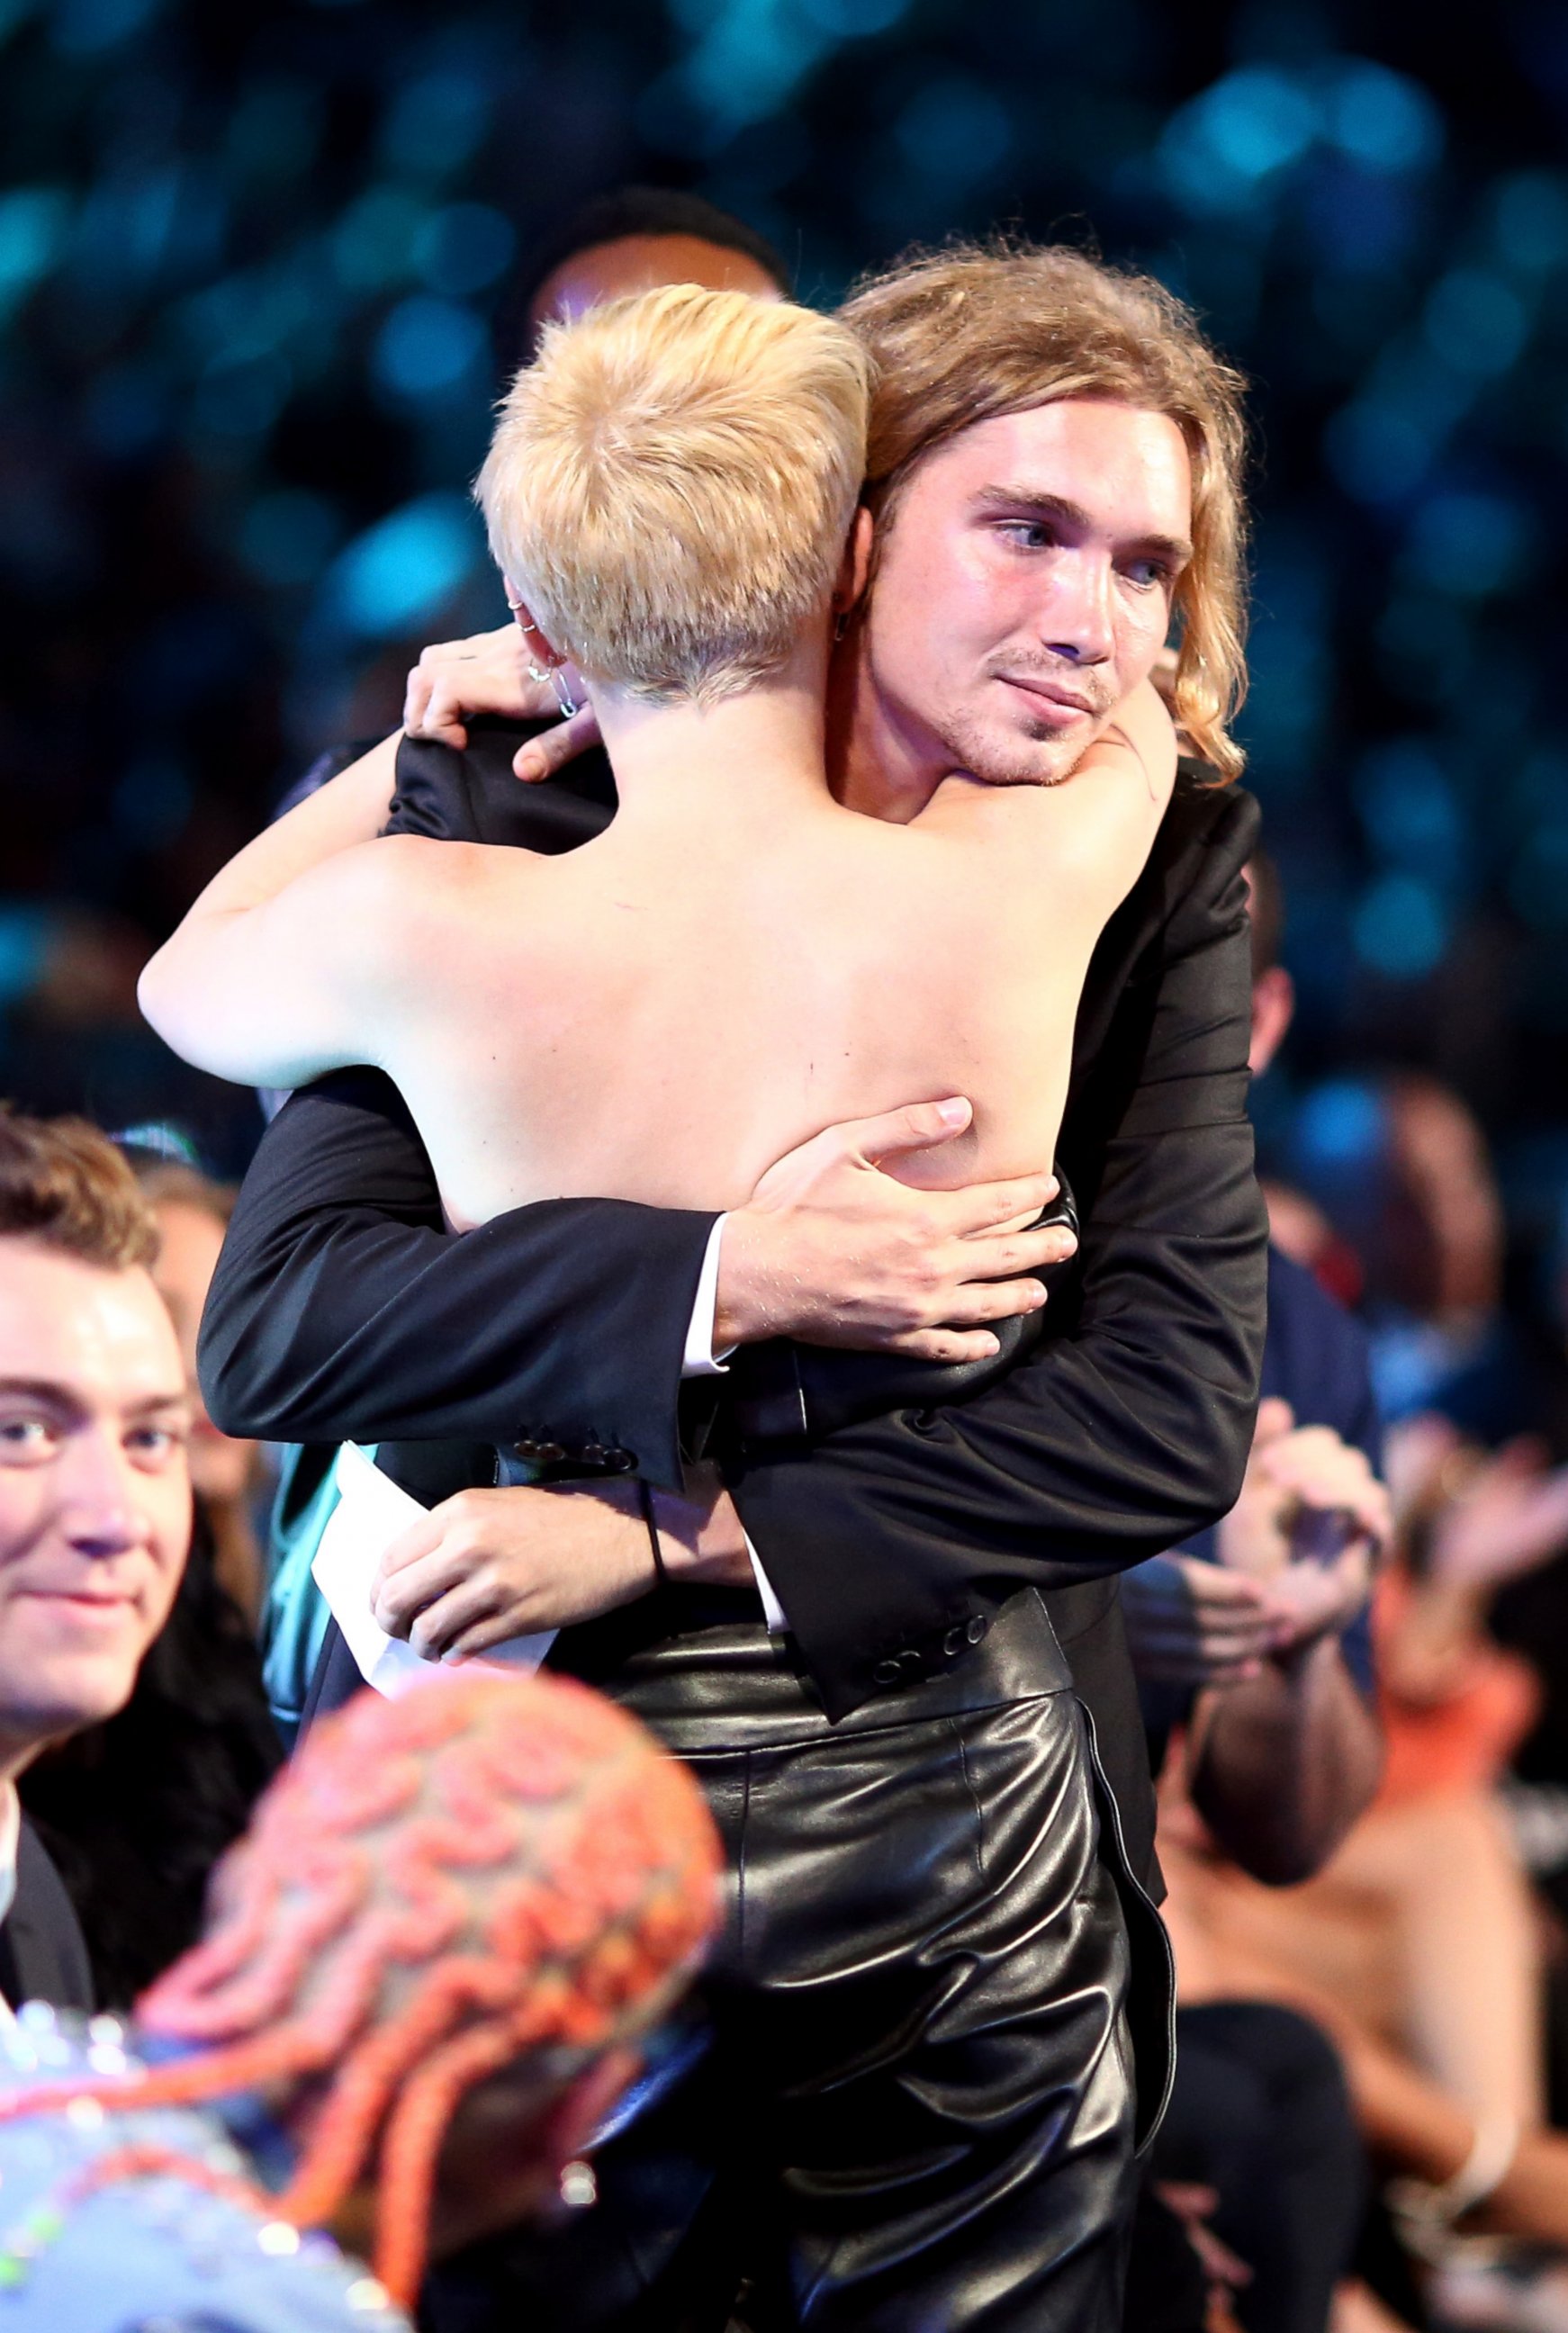 PHOTO: My Friend's Place representative Jesse and Miley Cyrus attend the 2014 MTV Video Music Awards at The Forum, Aug. 24, 2014 in Inglewood, Calif.